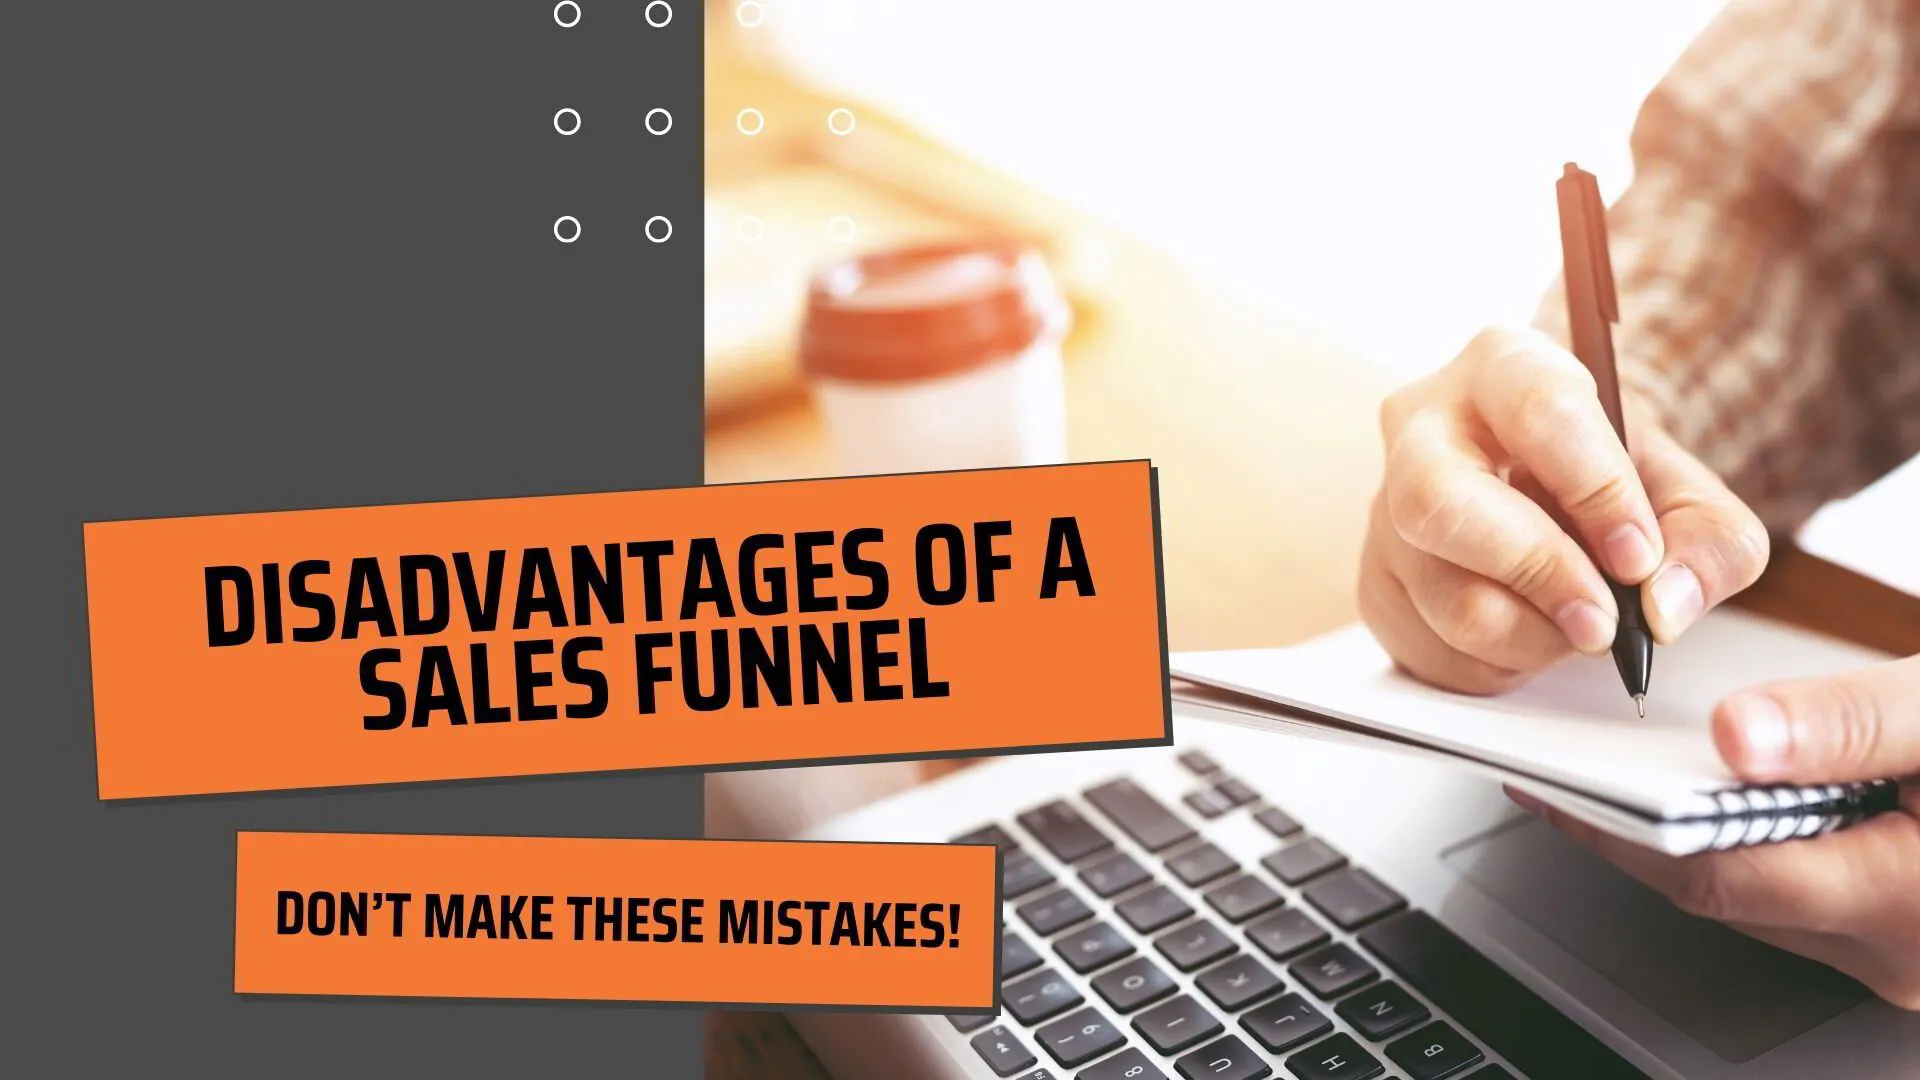 Disadvantages of a Sales Funnel - Don’t Make These Mistakes!